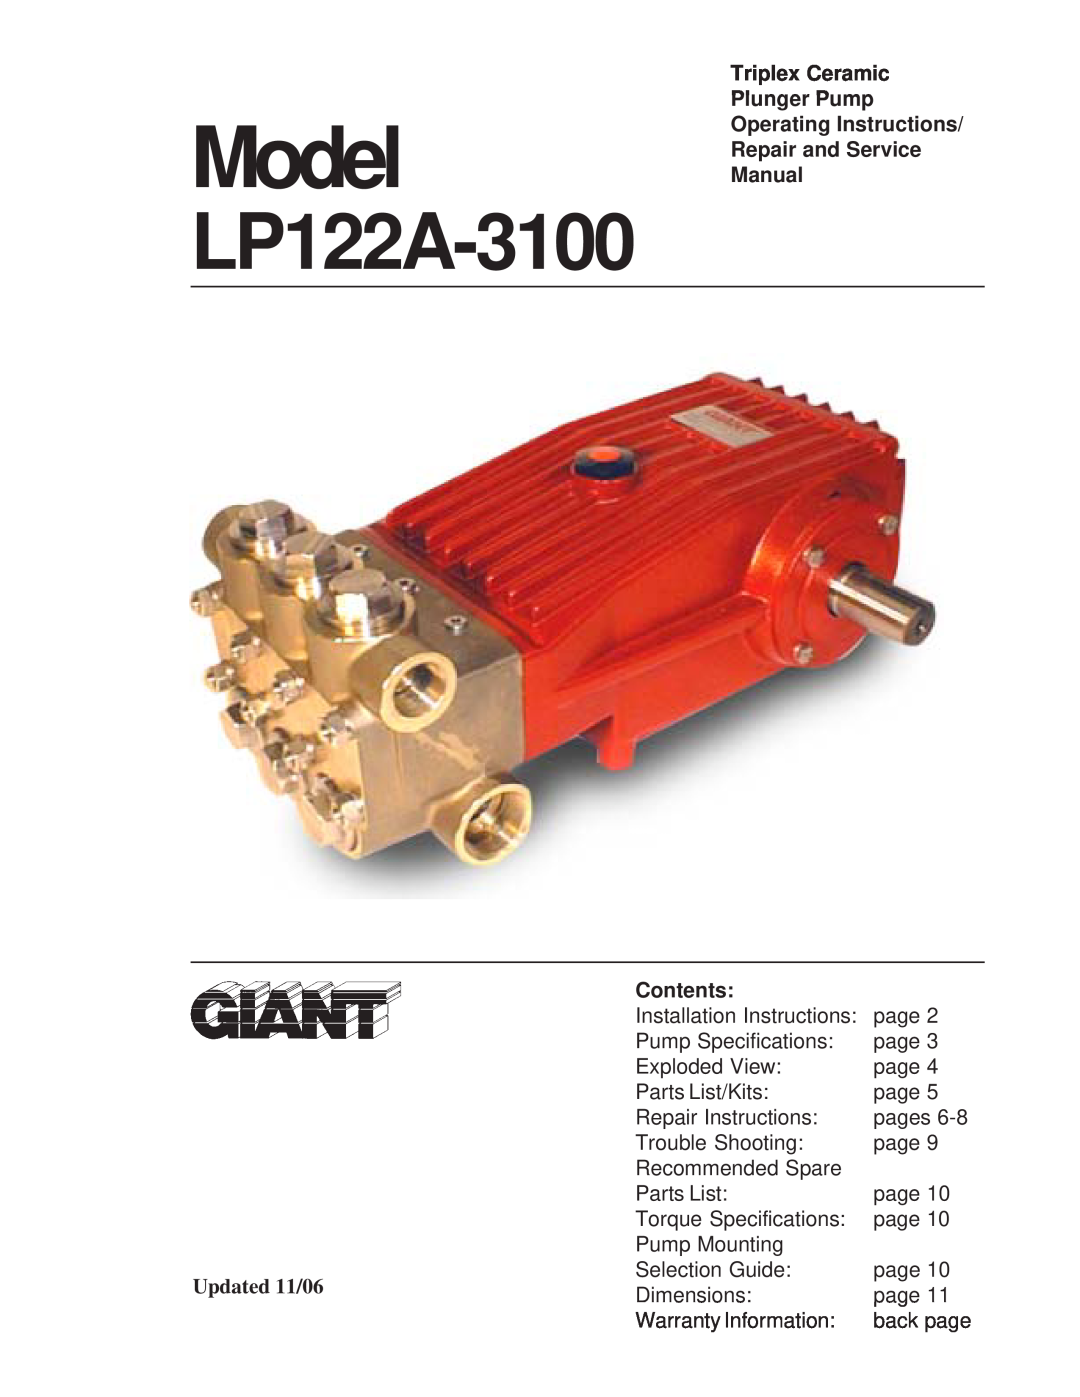 Giant LP122A-3100 operating instructions Triplex Ceramic Plunger Pump Operating Instructions, Repair and Service Manual 